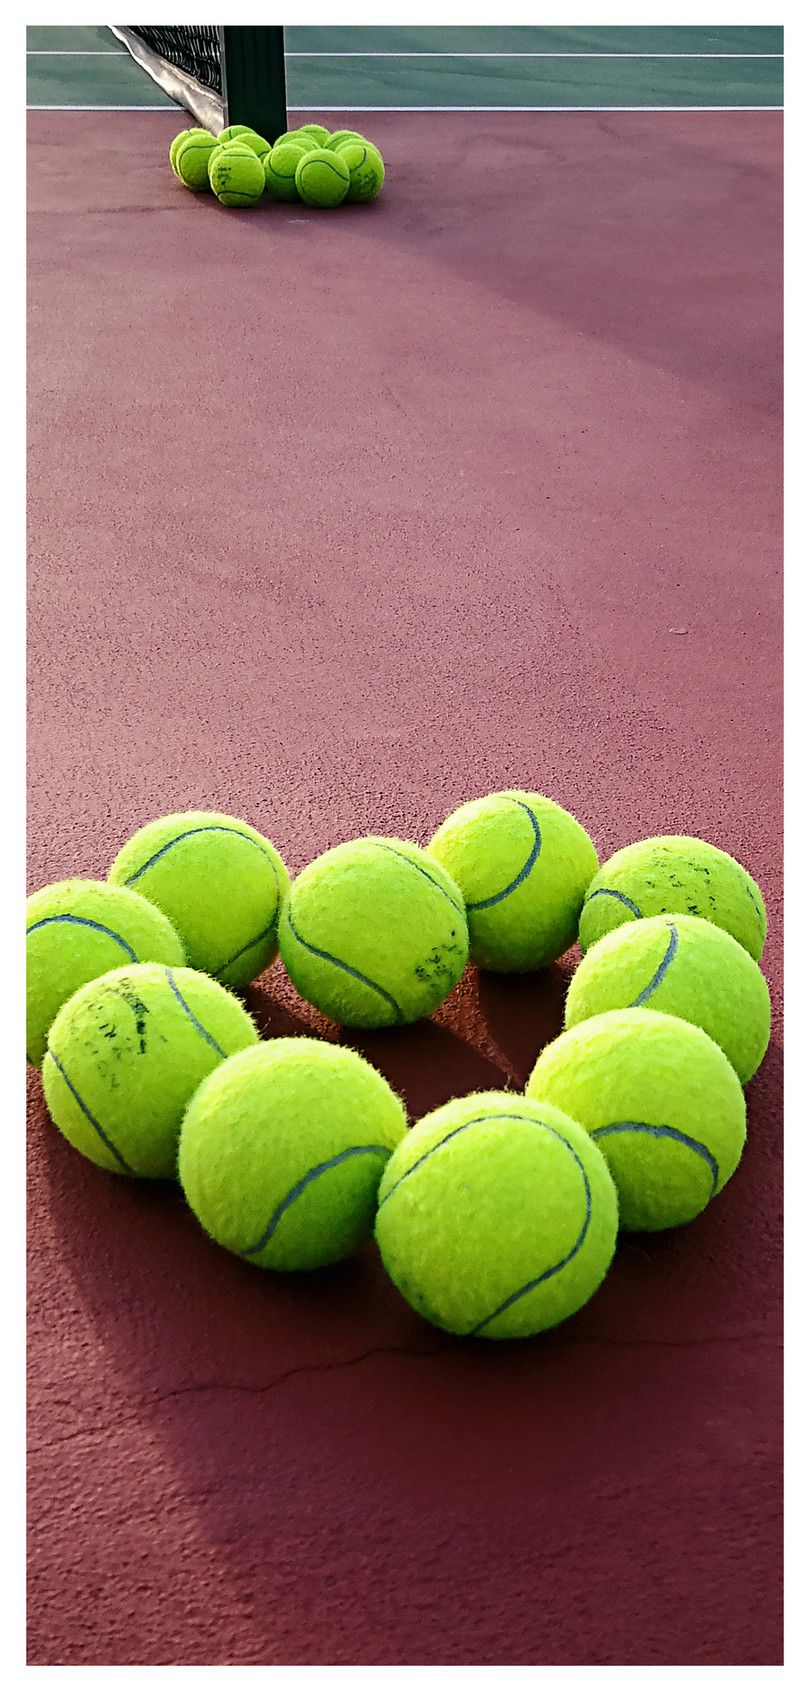 A group of tennis balls on the ground - Tennis